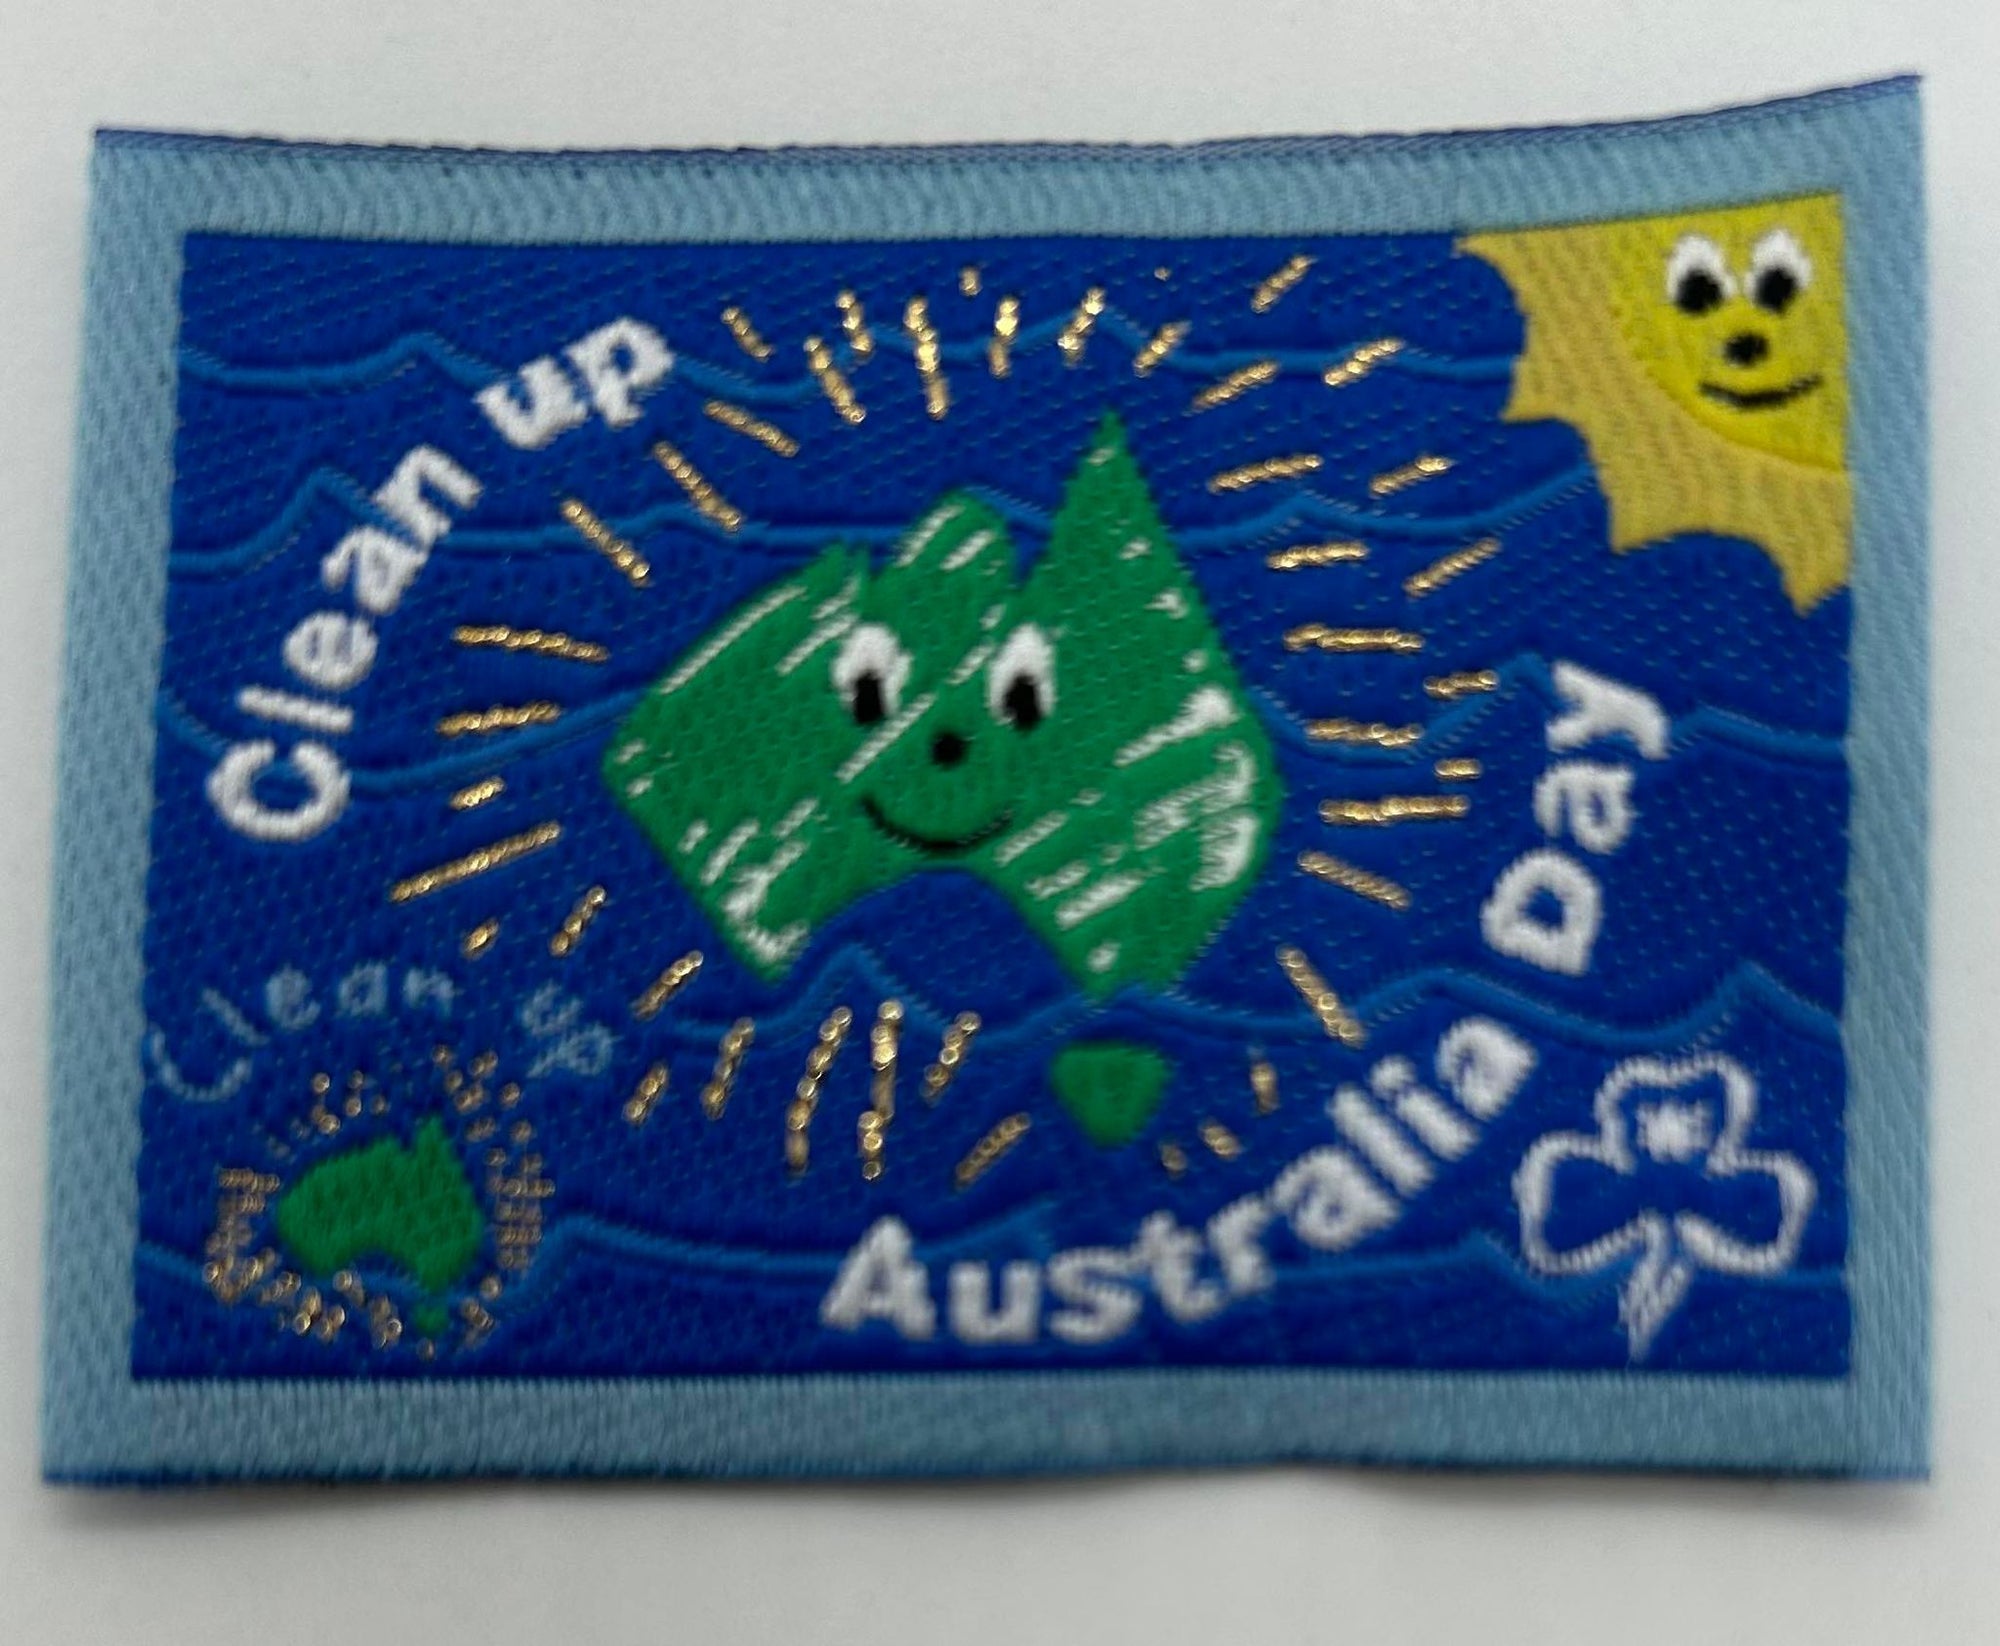 a square unbound woven badge with clean up Australia written on it with light blue around the edges and a green map of Australia in the middle